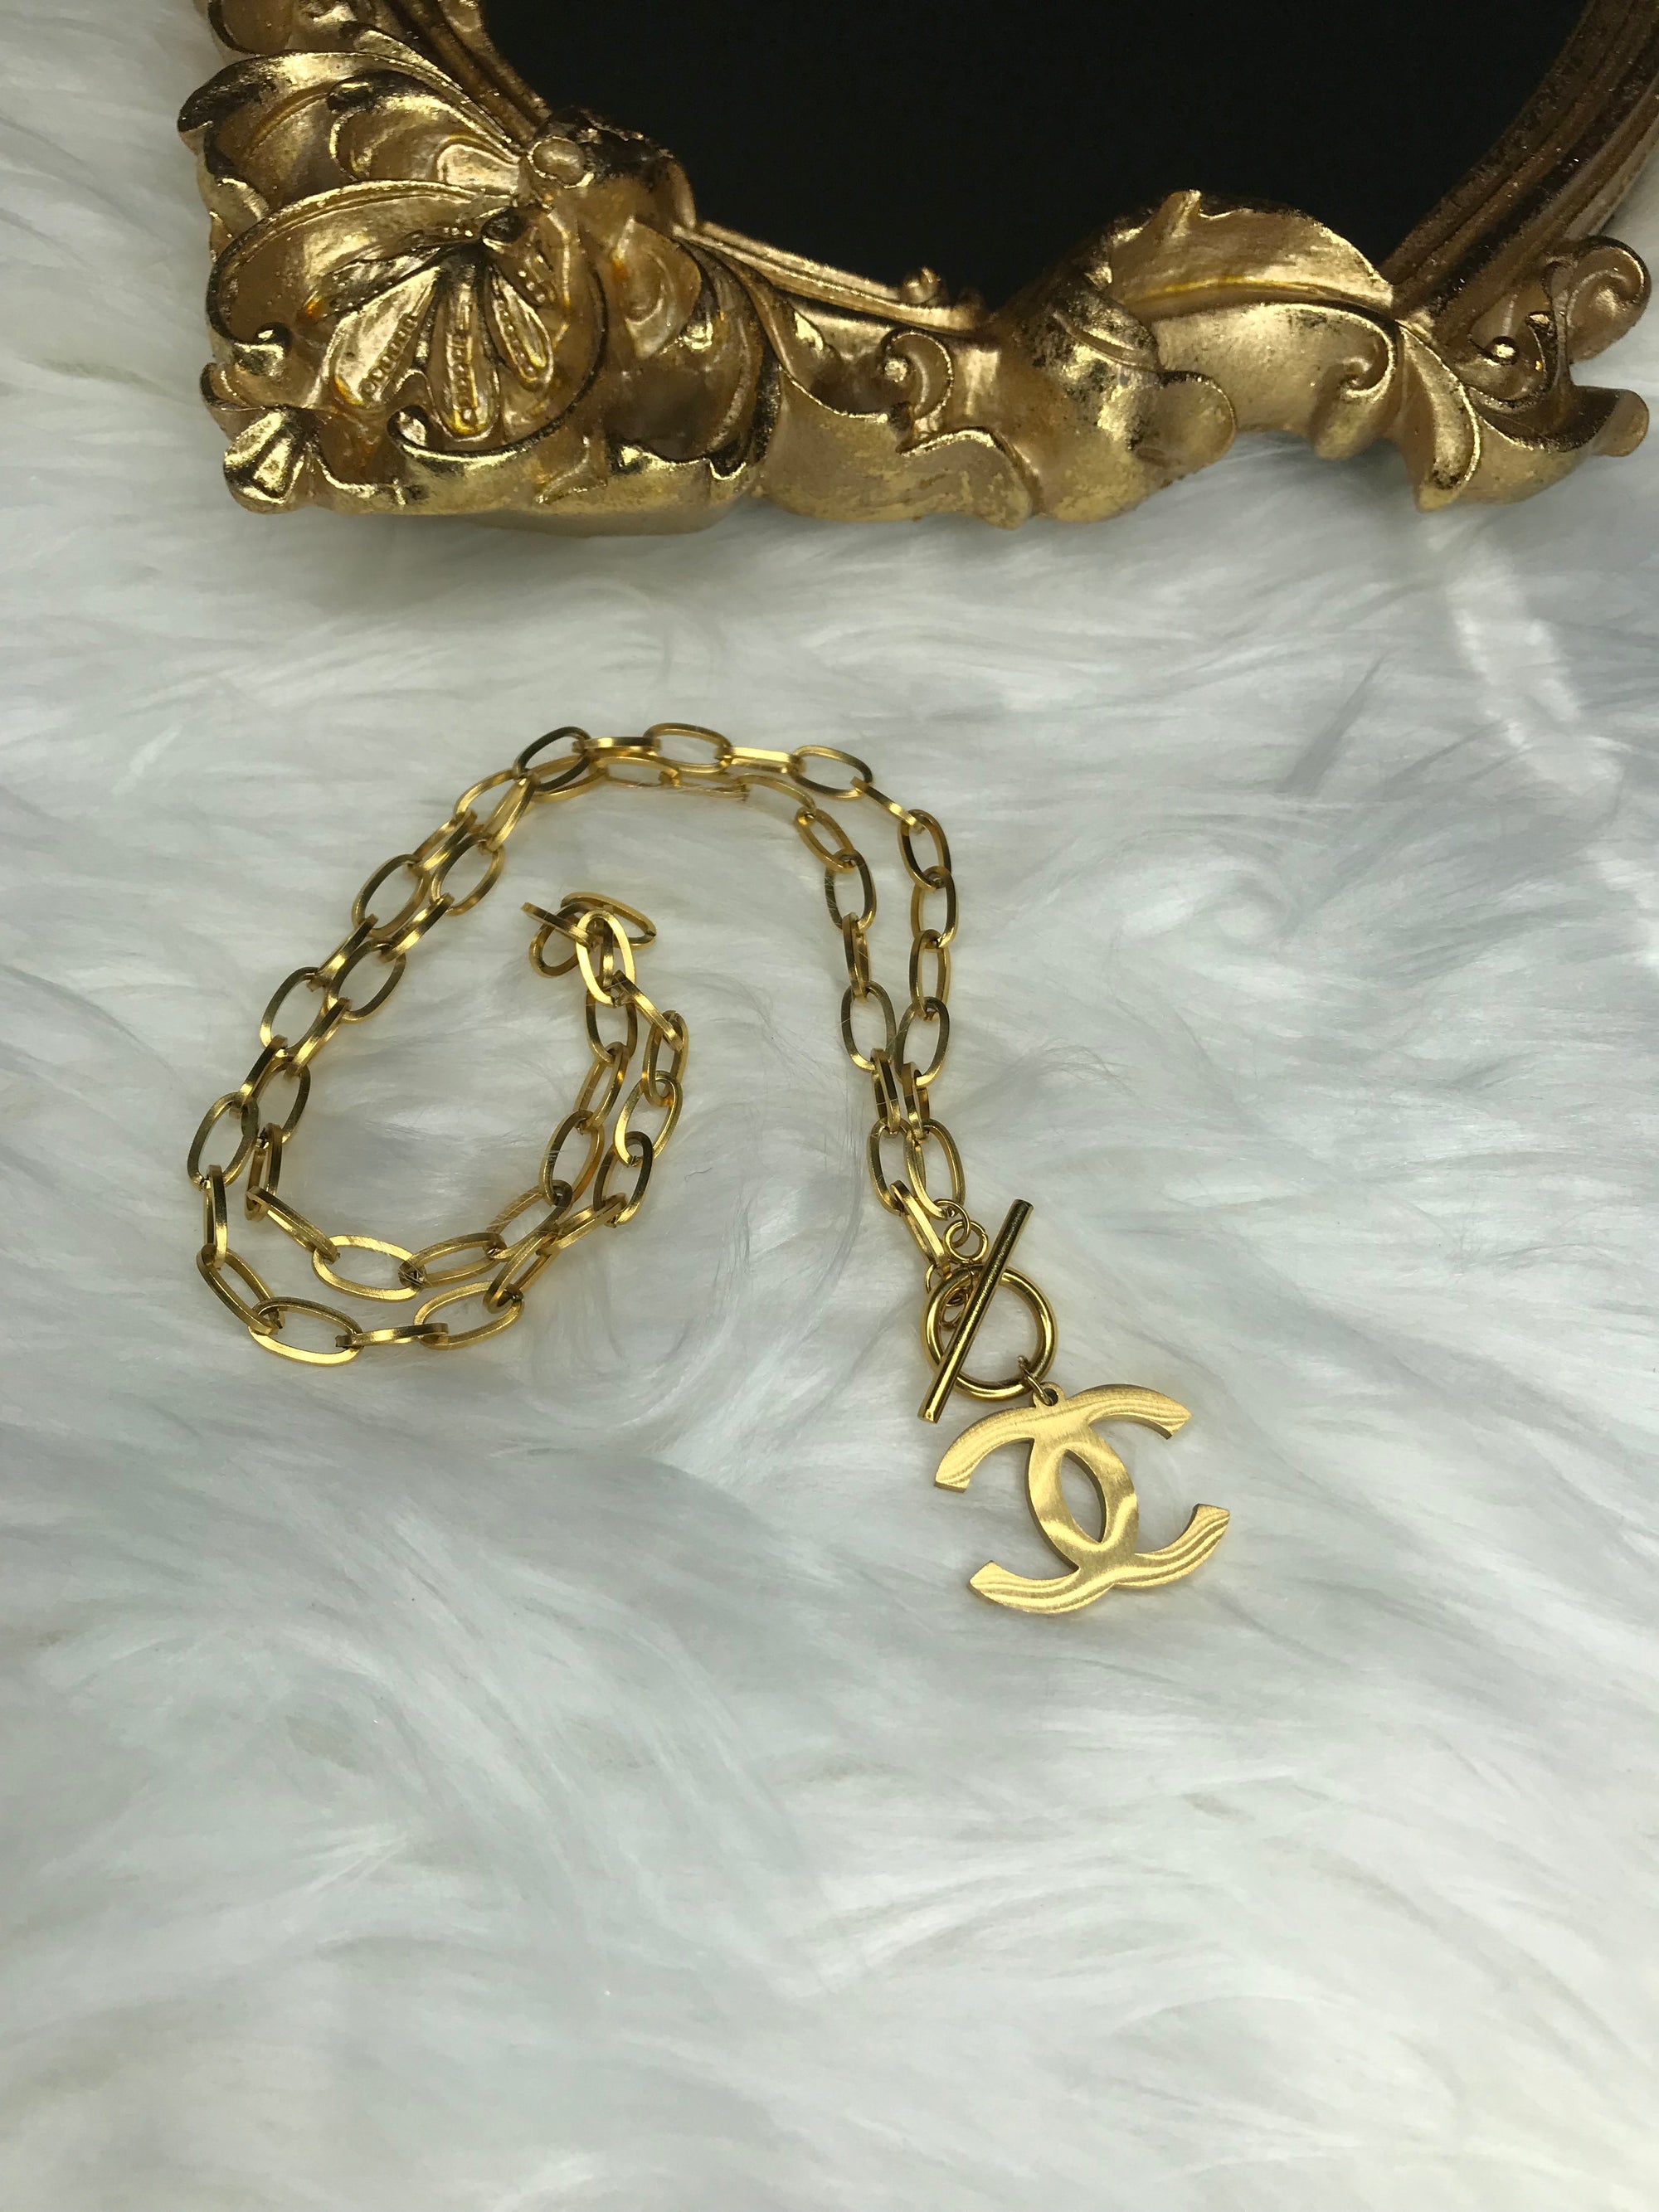 Repurposed / Reworked Chanel Charm Necklace - glamaristyles